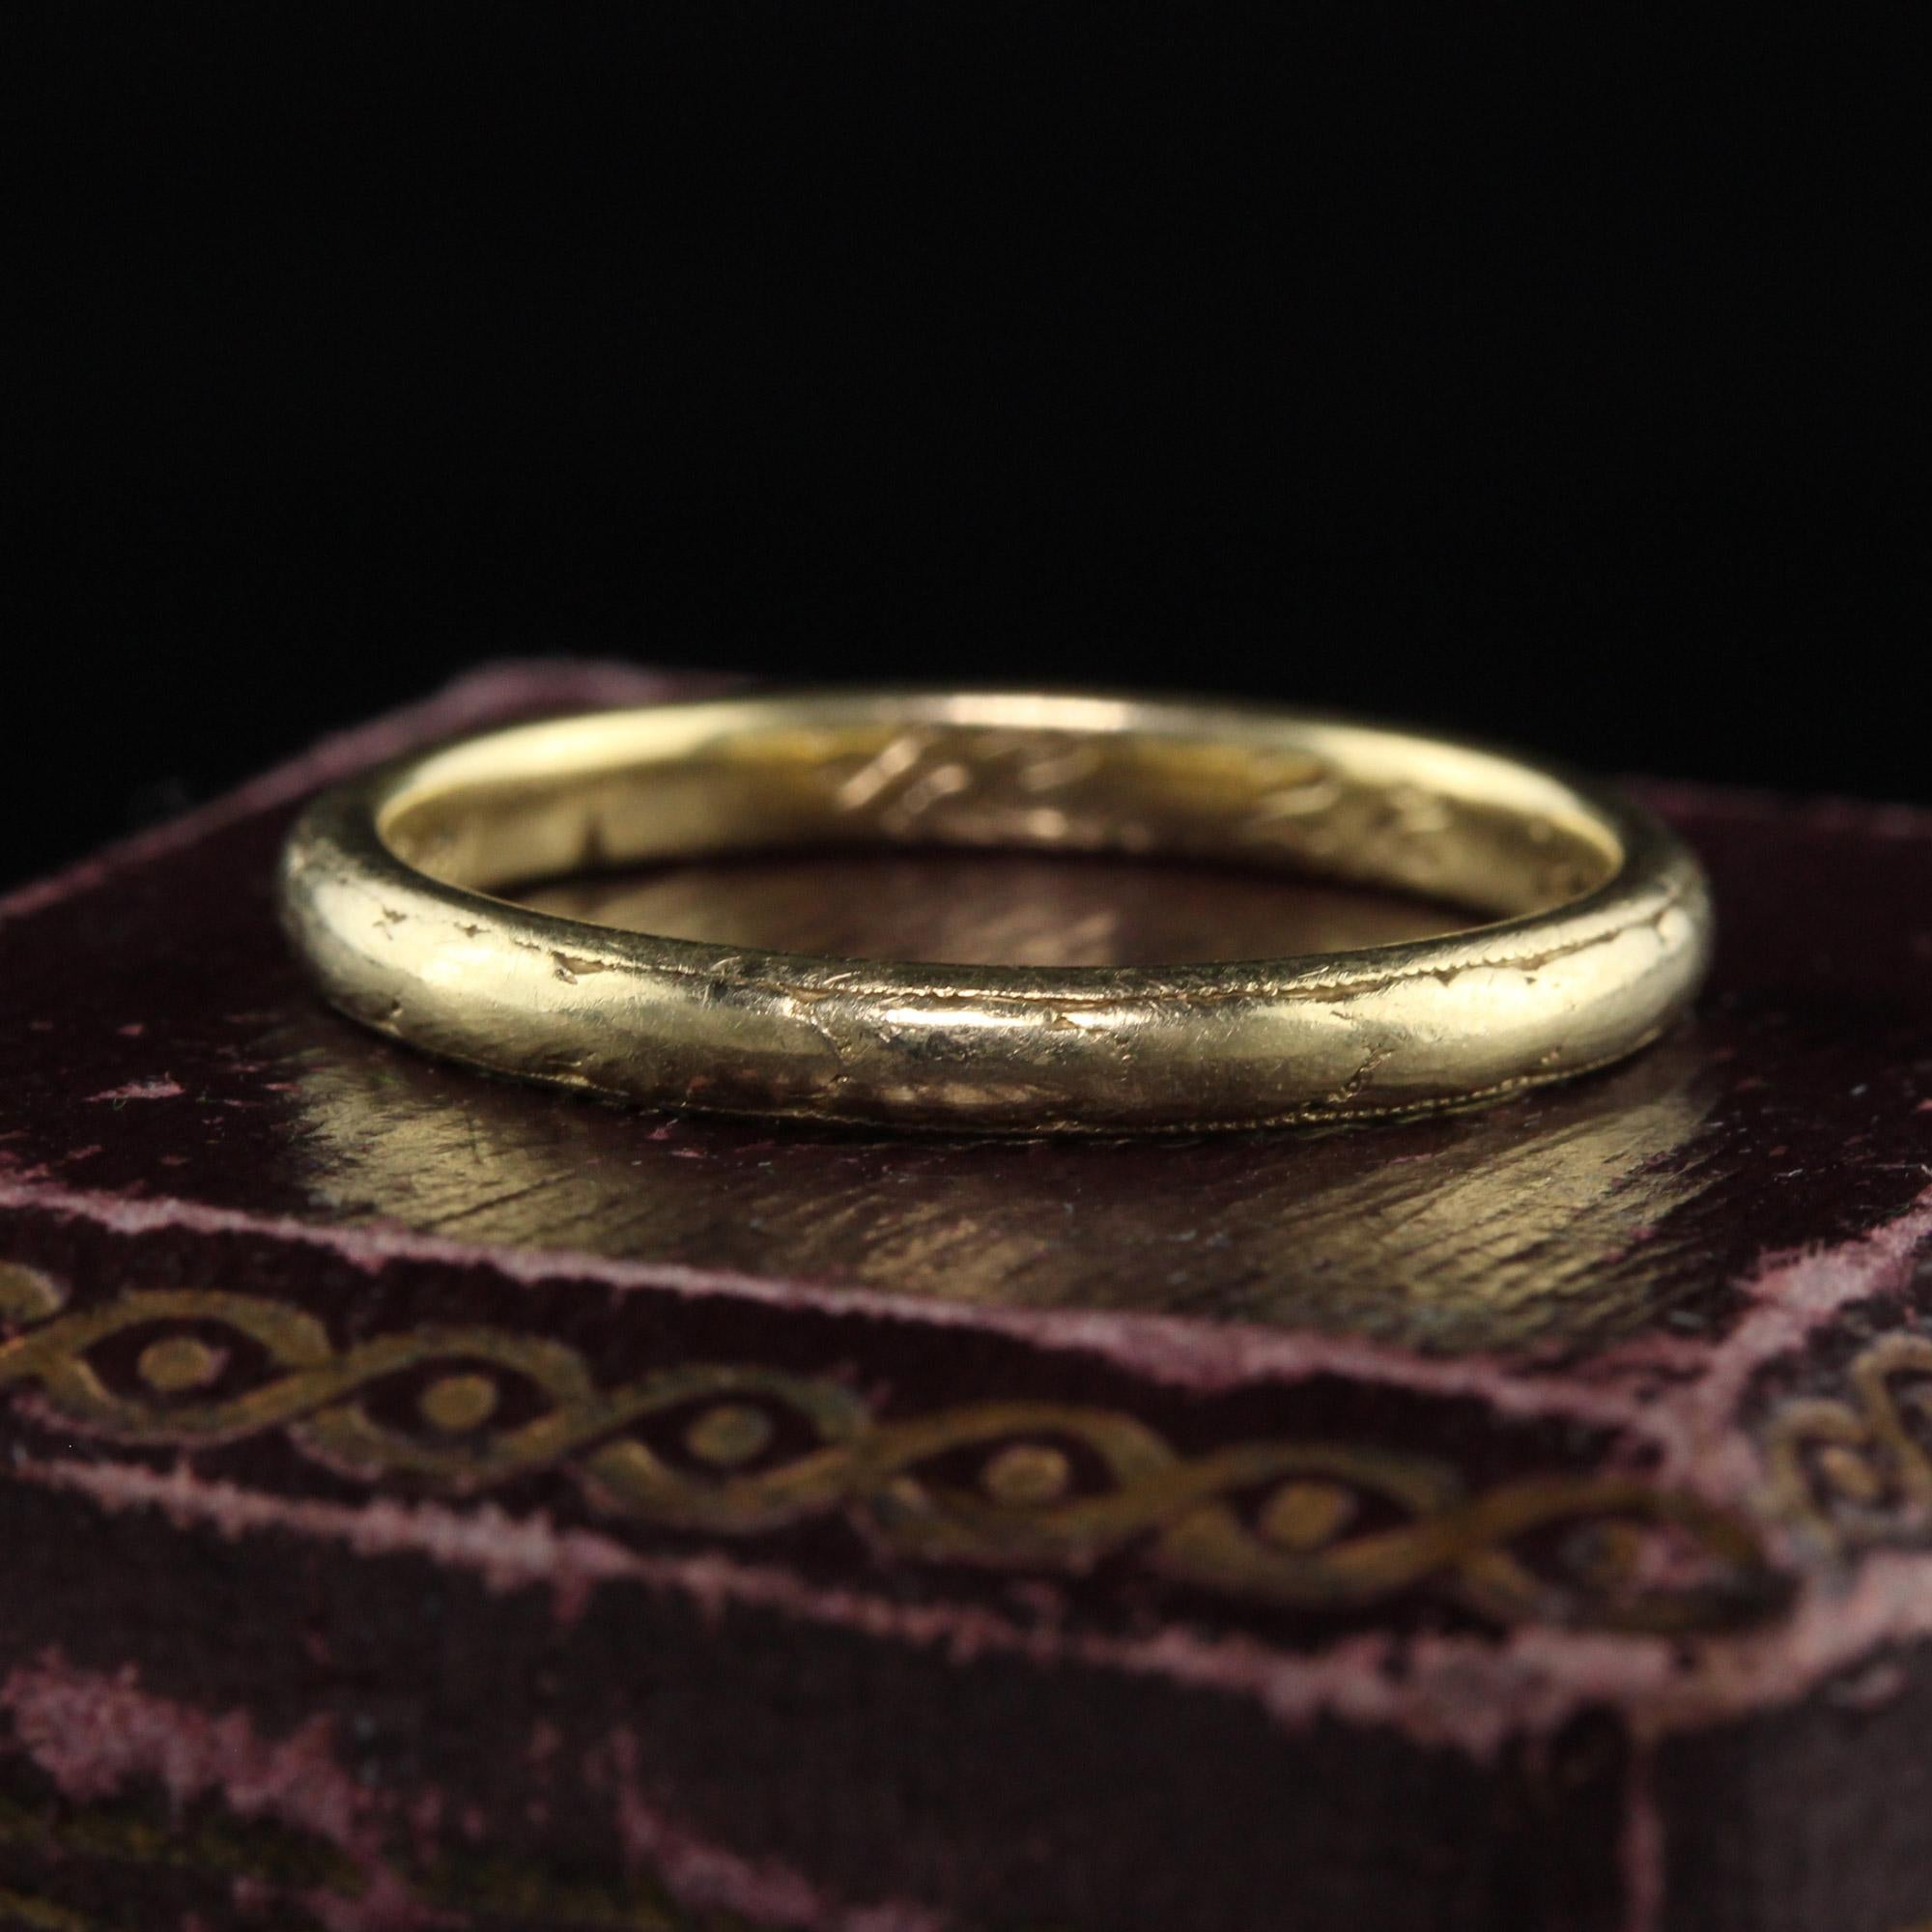 Beautiful Antique Art Deco Orange Blossom 18K Yellow Gold Engraved Wedding Band. This classic band is crafted in 18k yellow gold. The band has faded engravings on the top with the inside of the ring being deeply engraved 